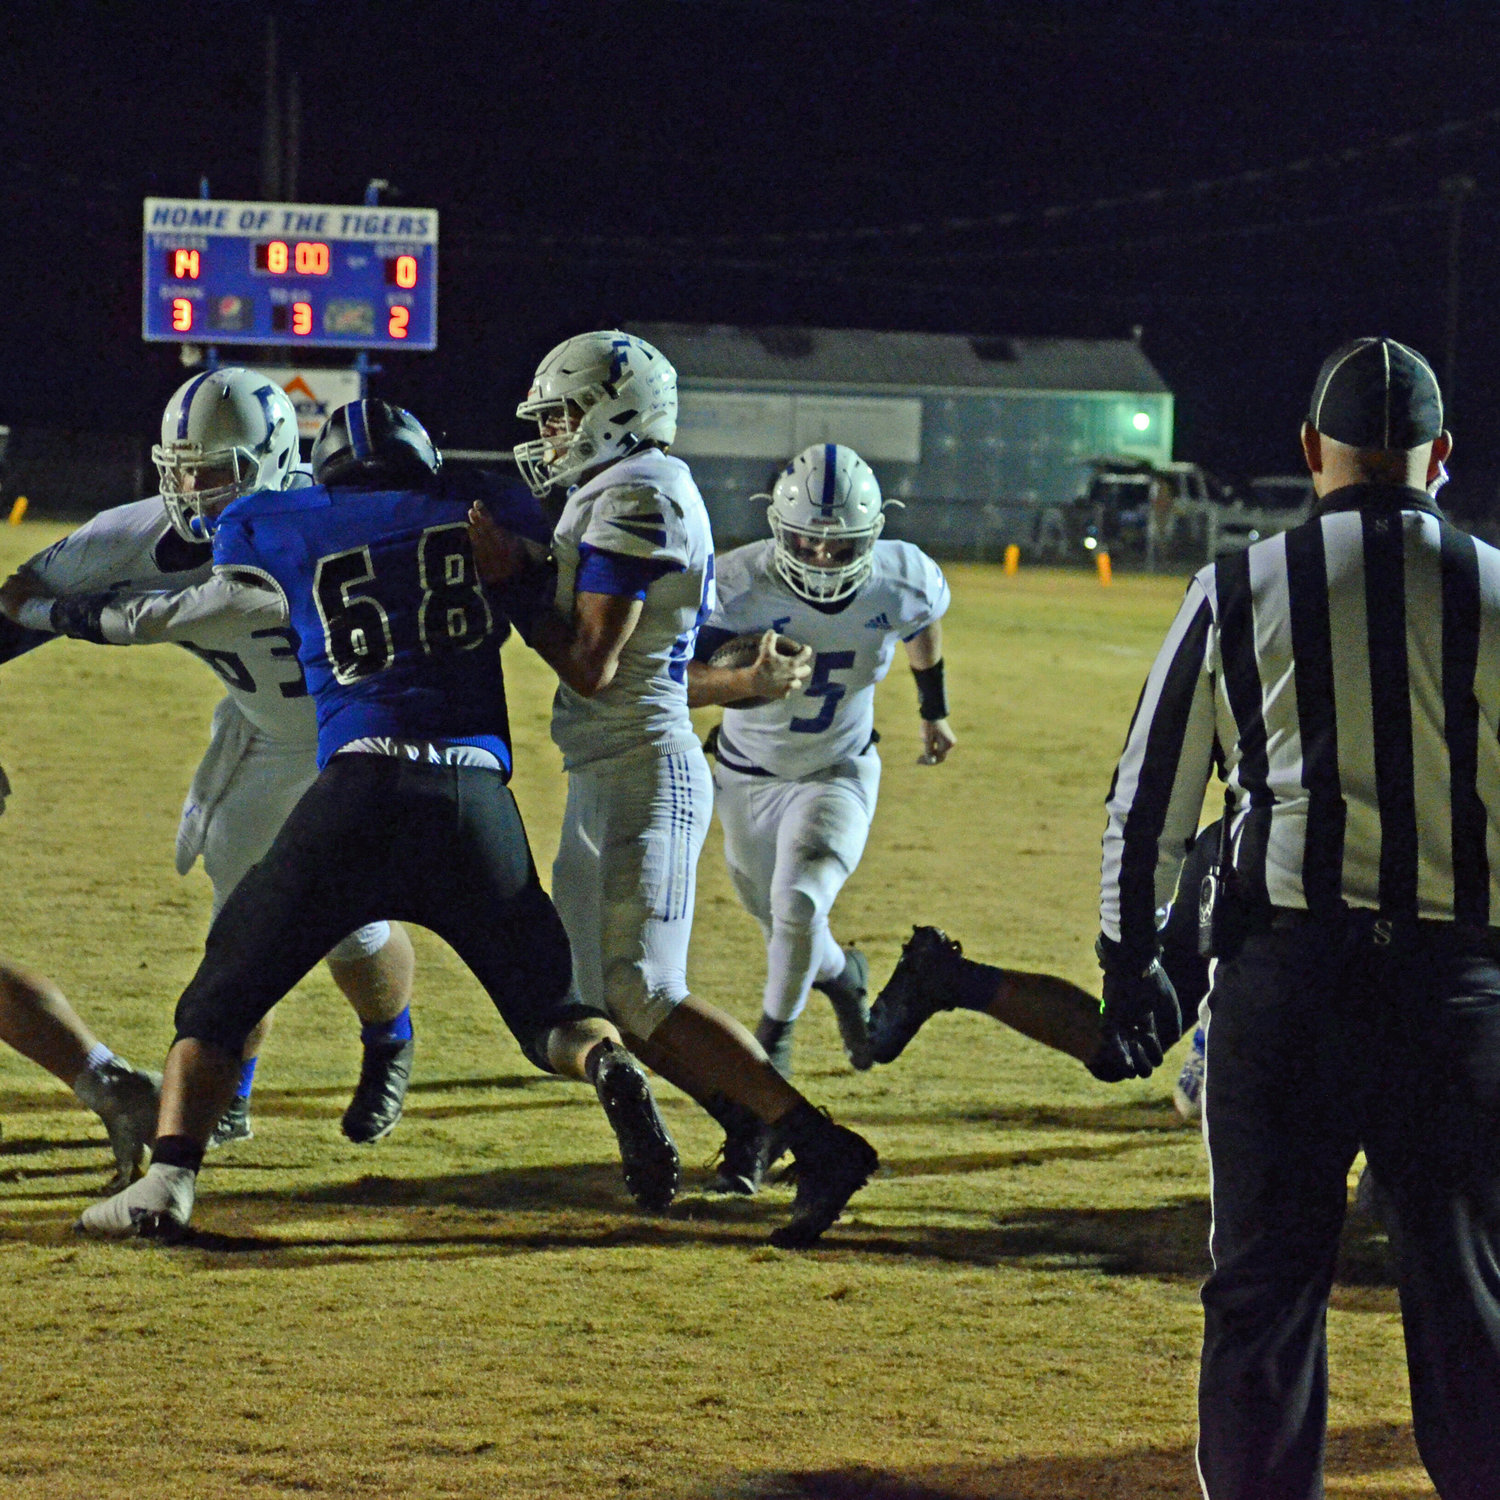 Forrest quarterback Max Kirby (5) gets the Rockets on the board with a 1-yard second quarter touchdown.